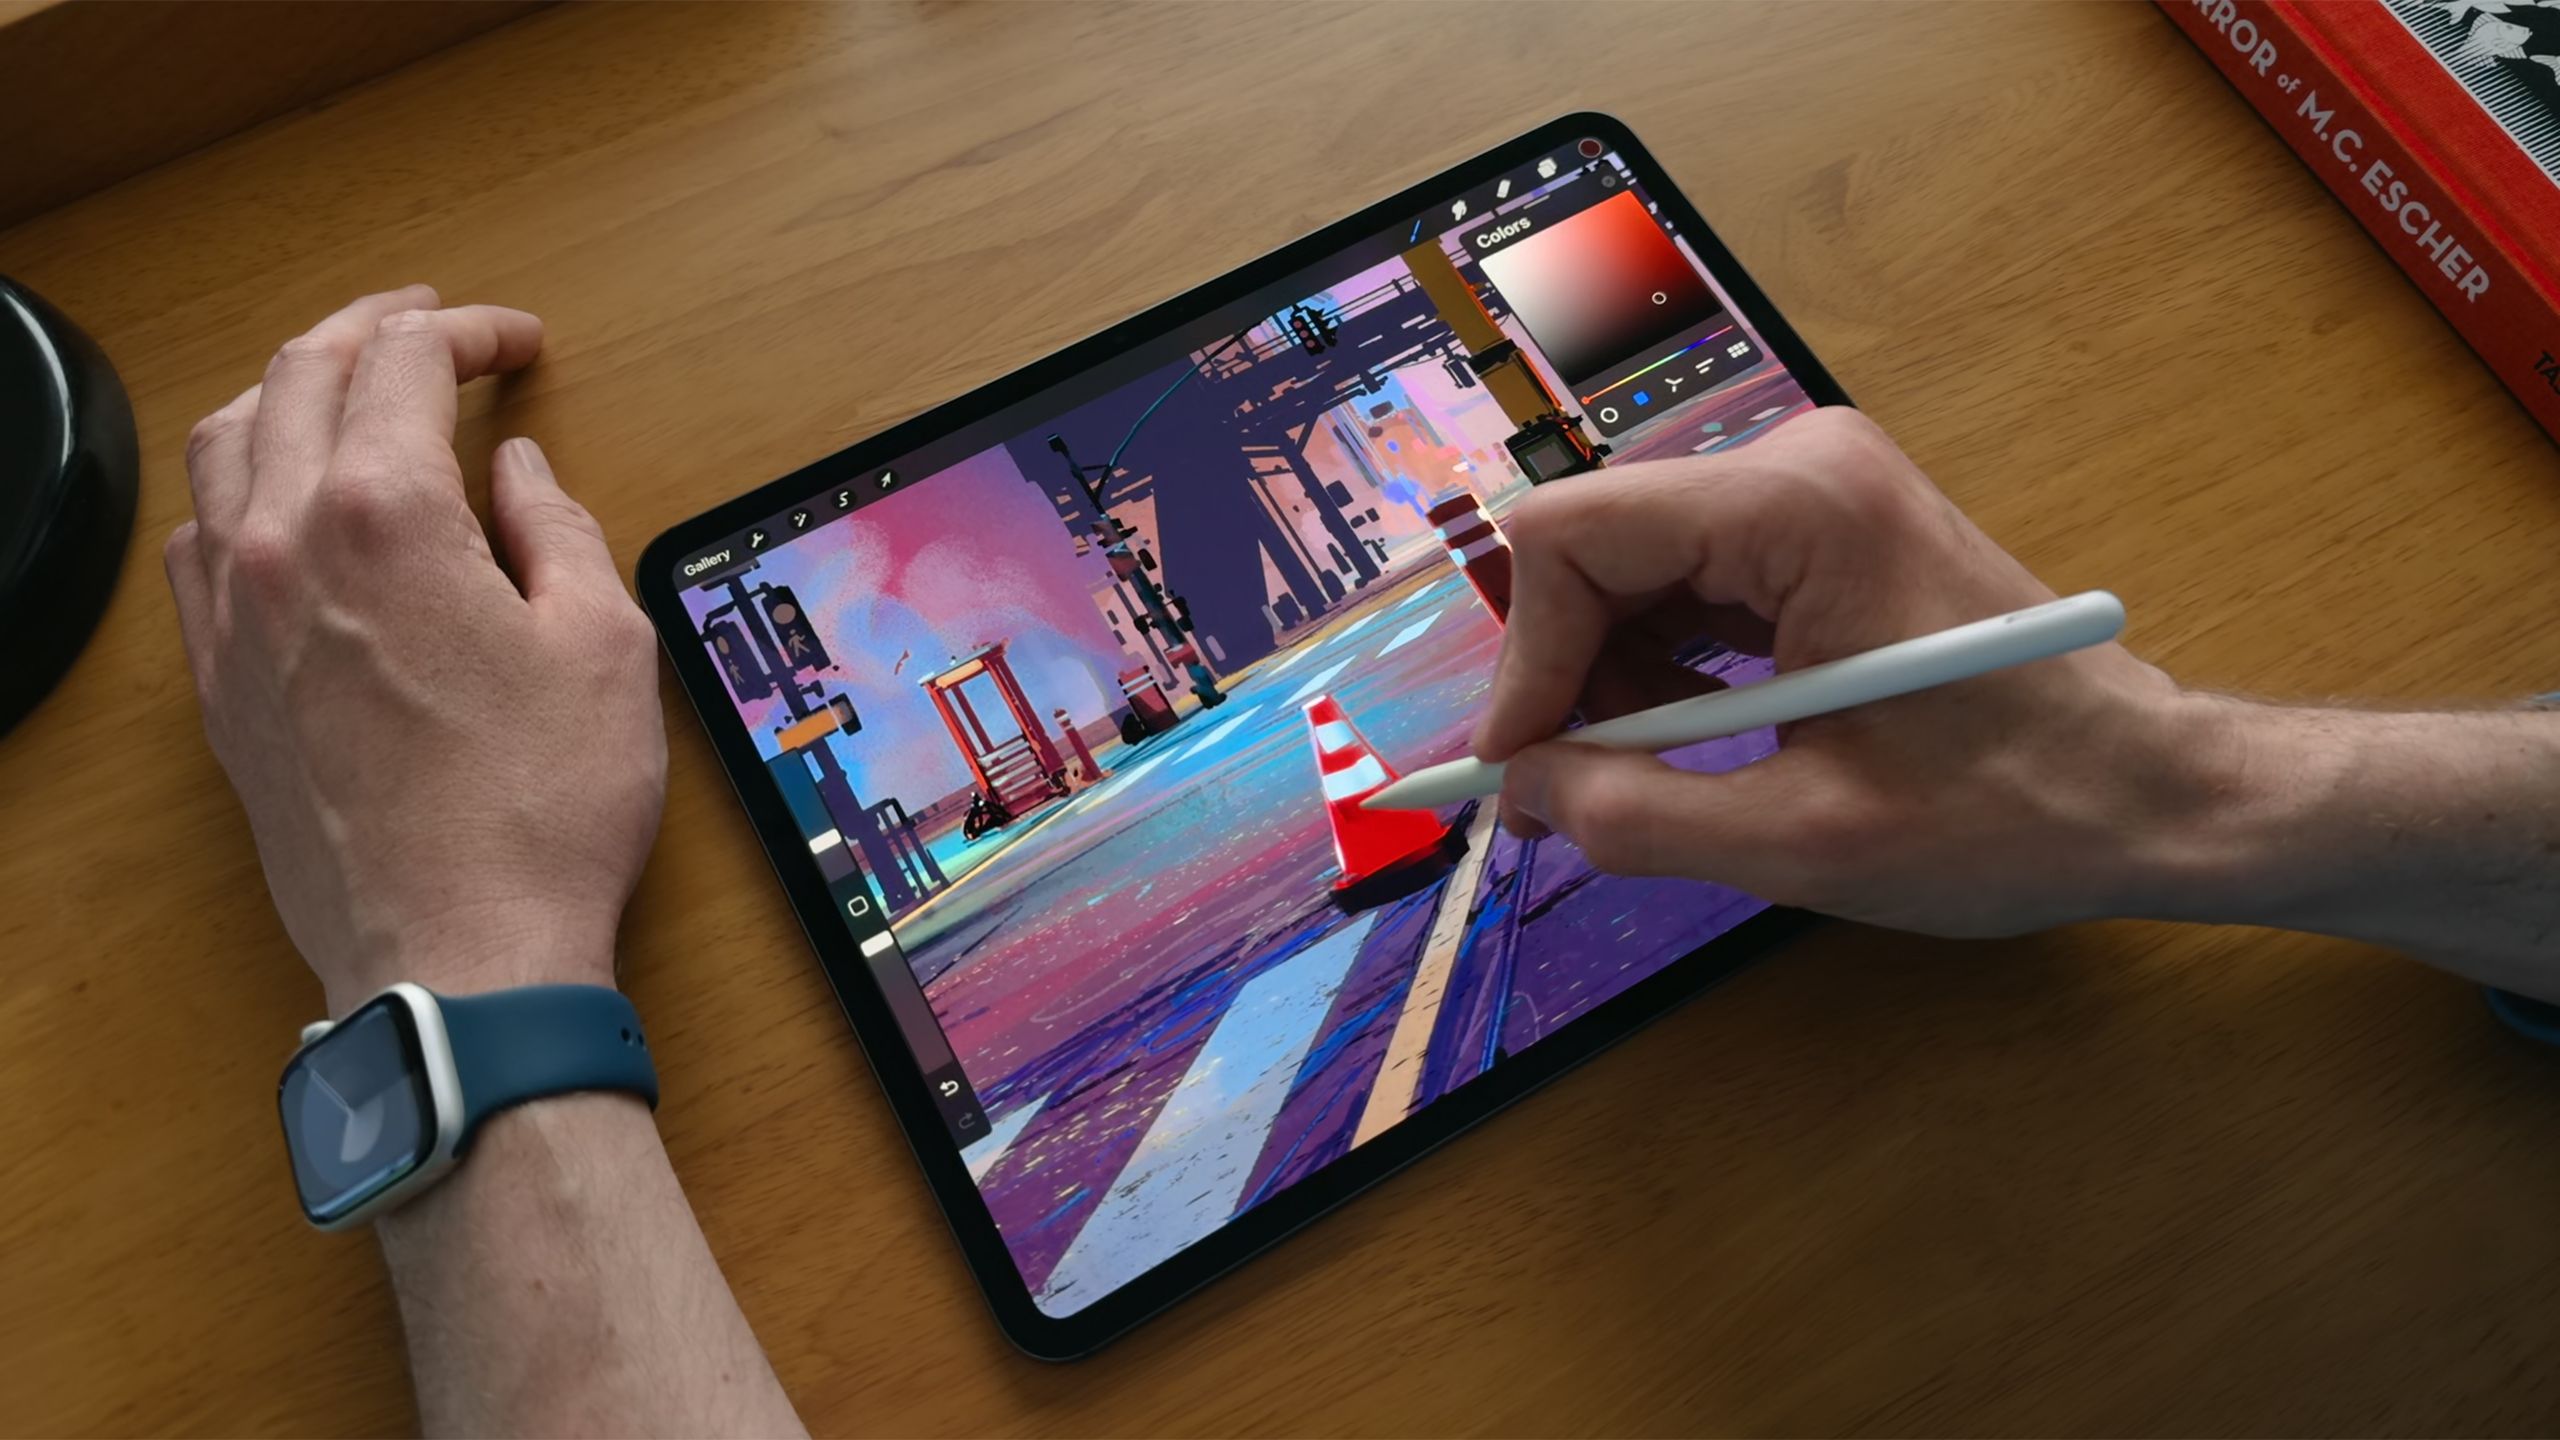 How to buy Apple’s new iPads and accessories